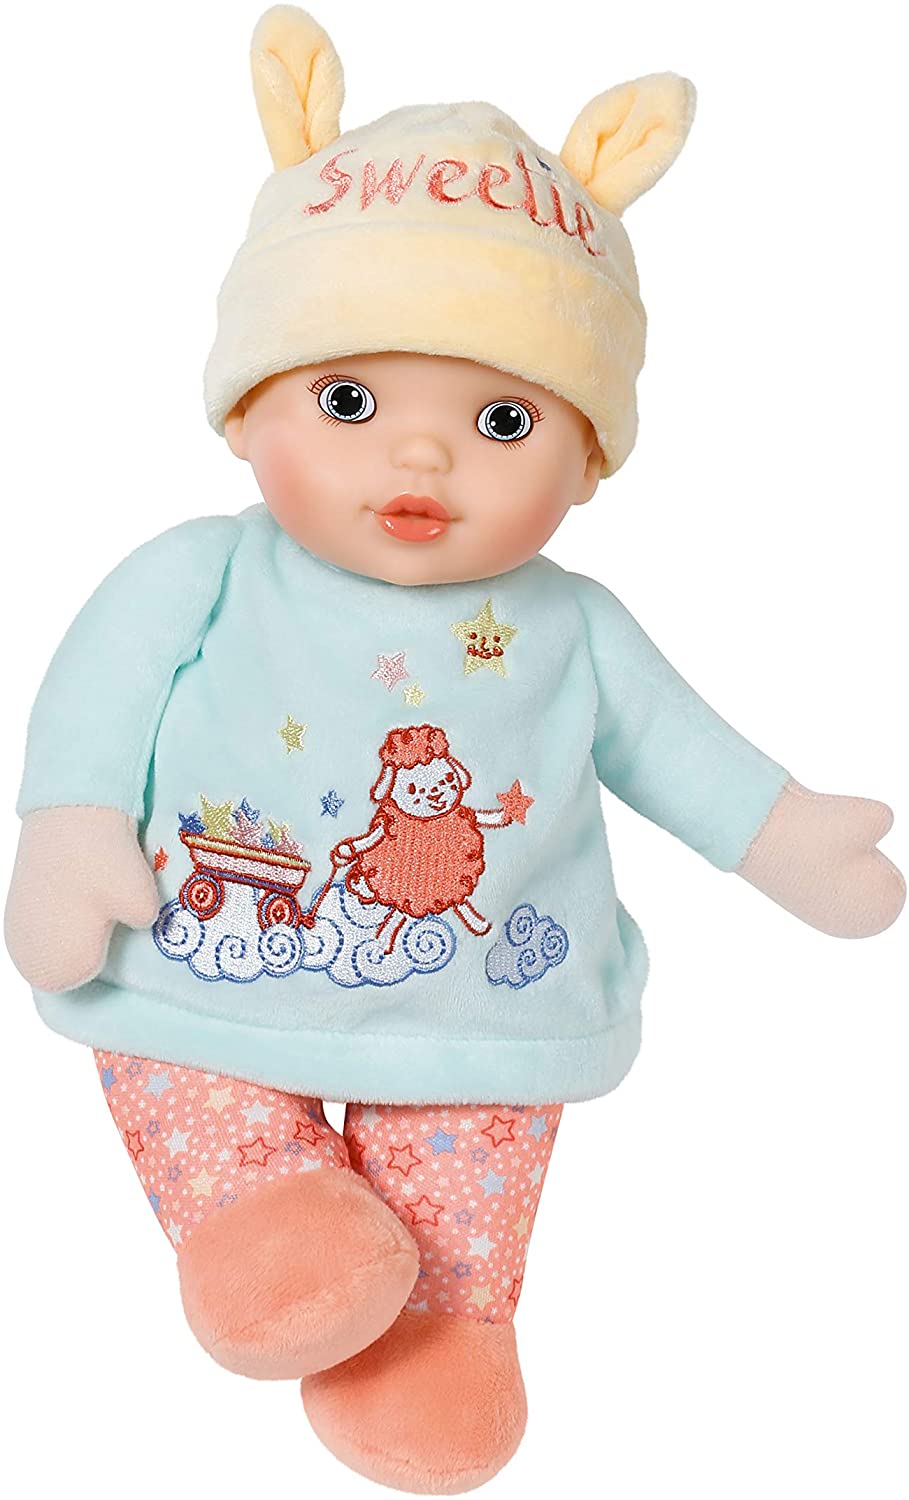 Baby Annabell 702932 Sweetie para bebés 30cm